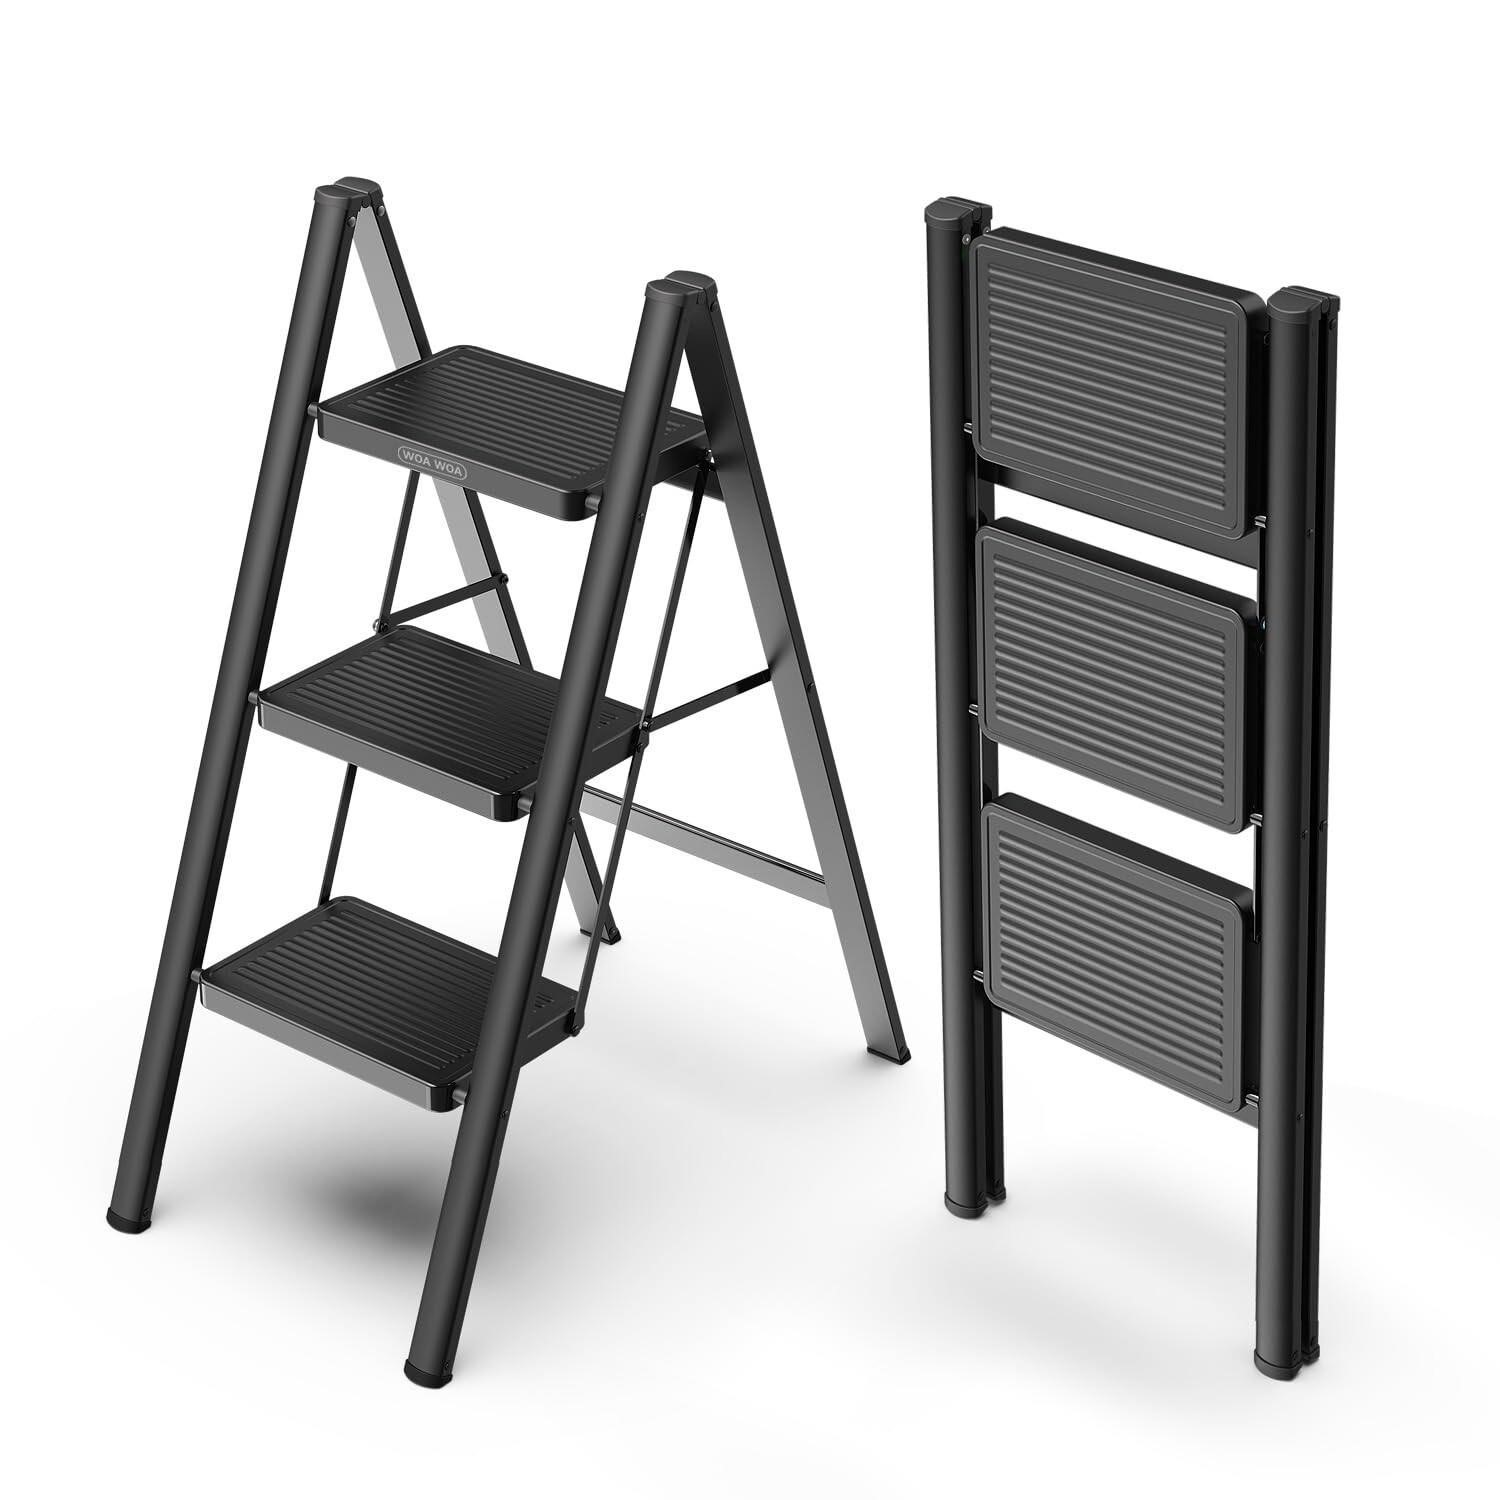 3 Step Ladder, Folding Step Stool with Non